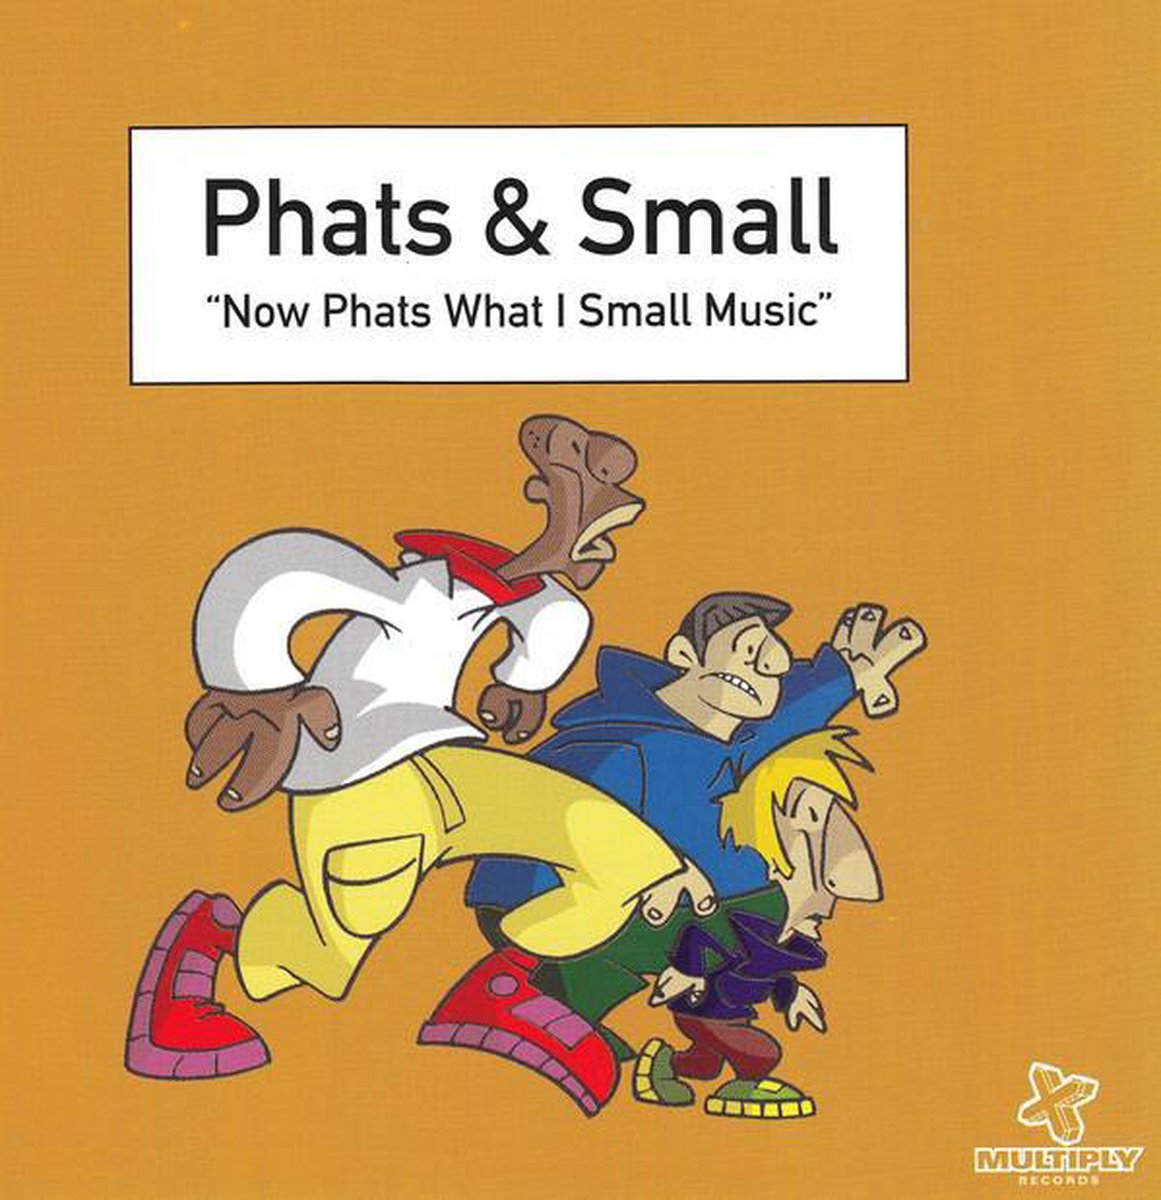 Now Phat's What I Small M - Phats & Small